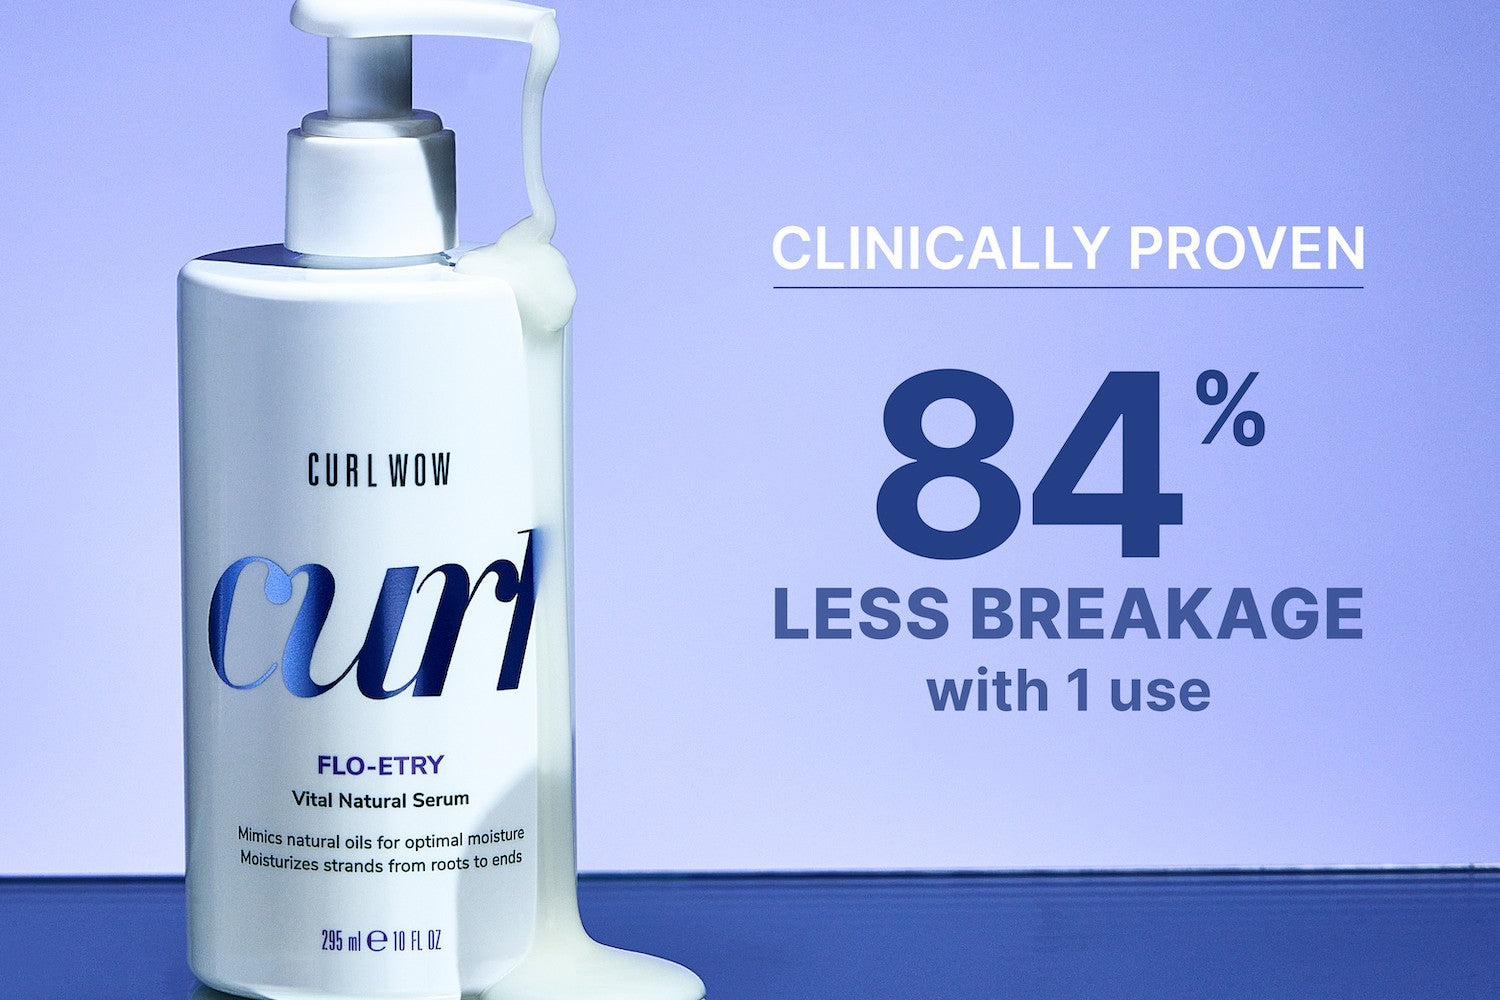 Clinically proven: 84% less breakage with 1 use